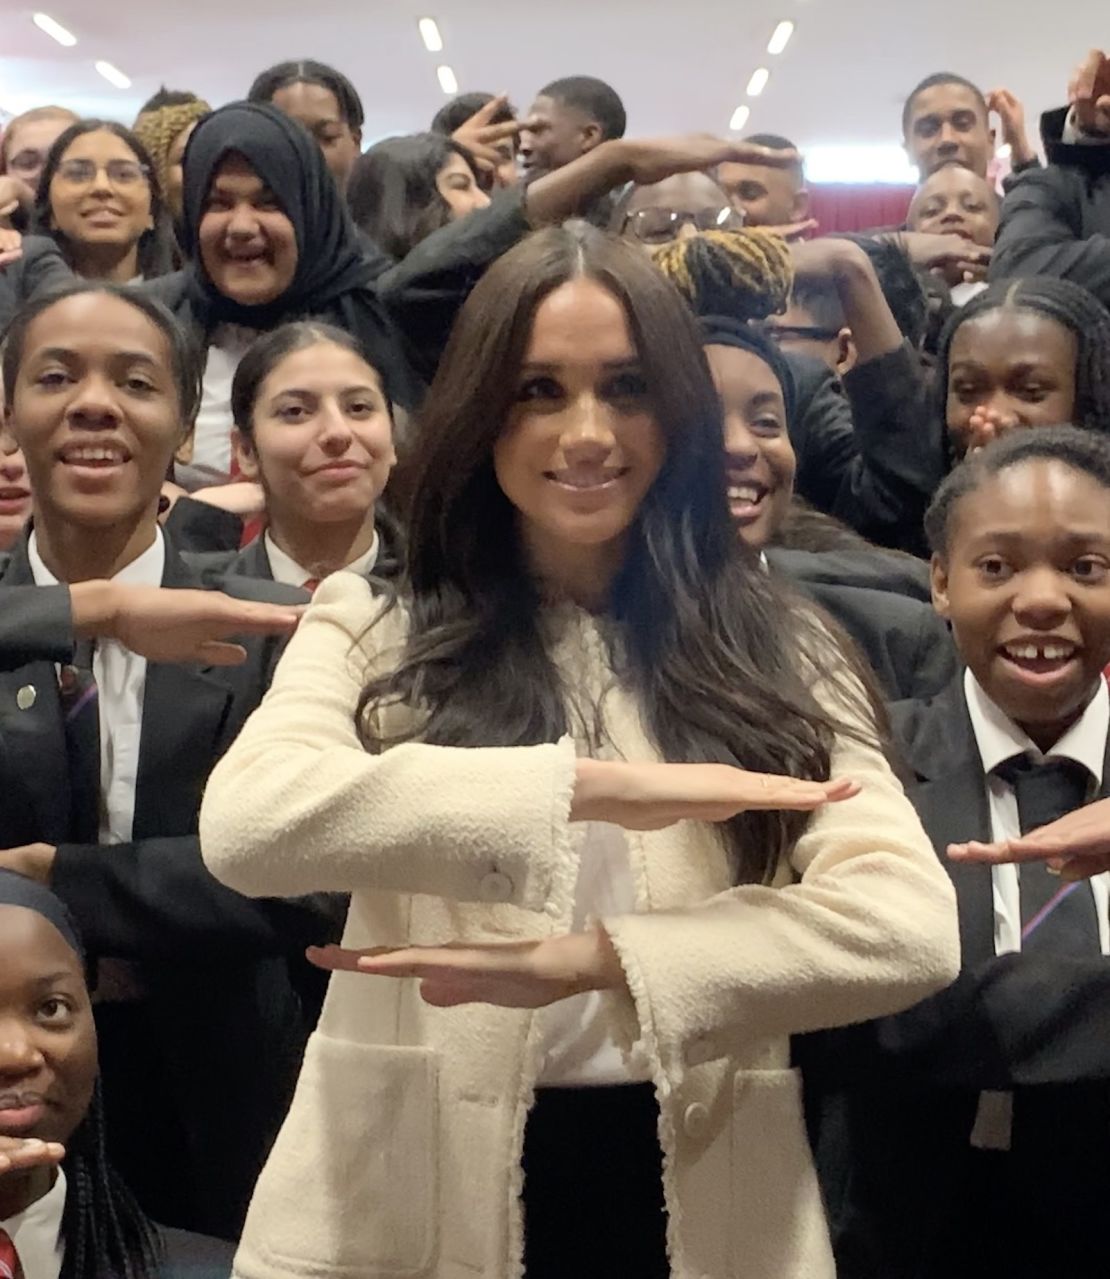 Meghan visited the Robert Clack Upper School in Dagenham, London, on Friday to "celebrate the achievements of women" ahead of International Women's Day